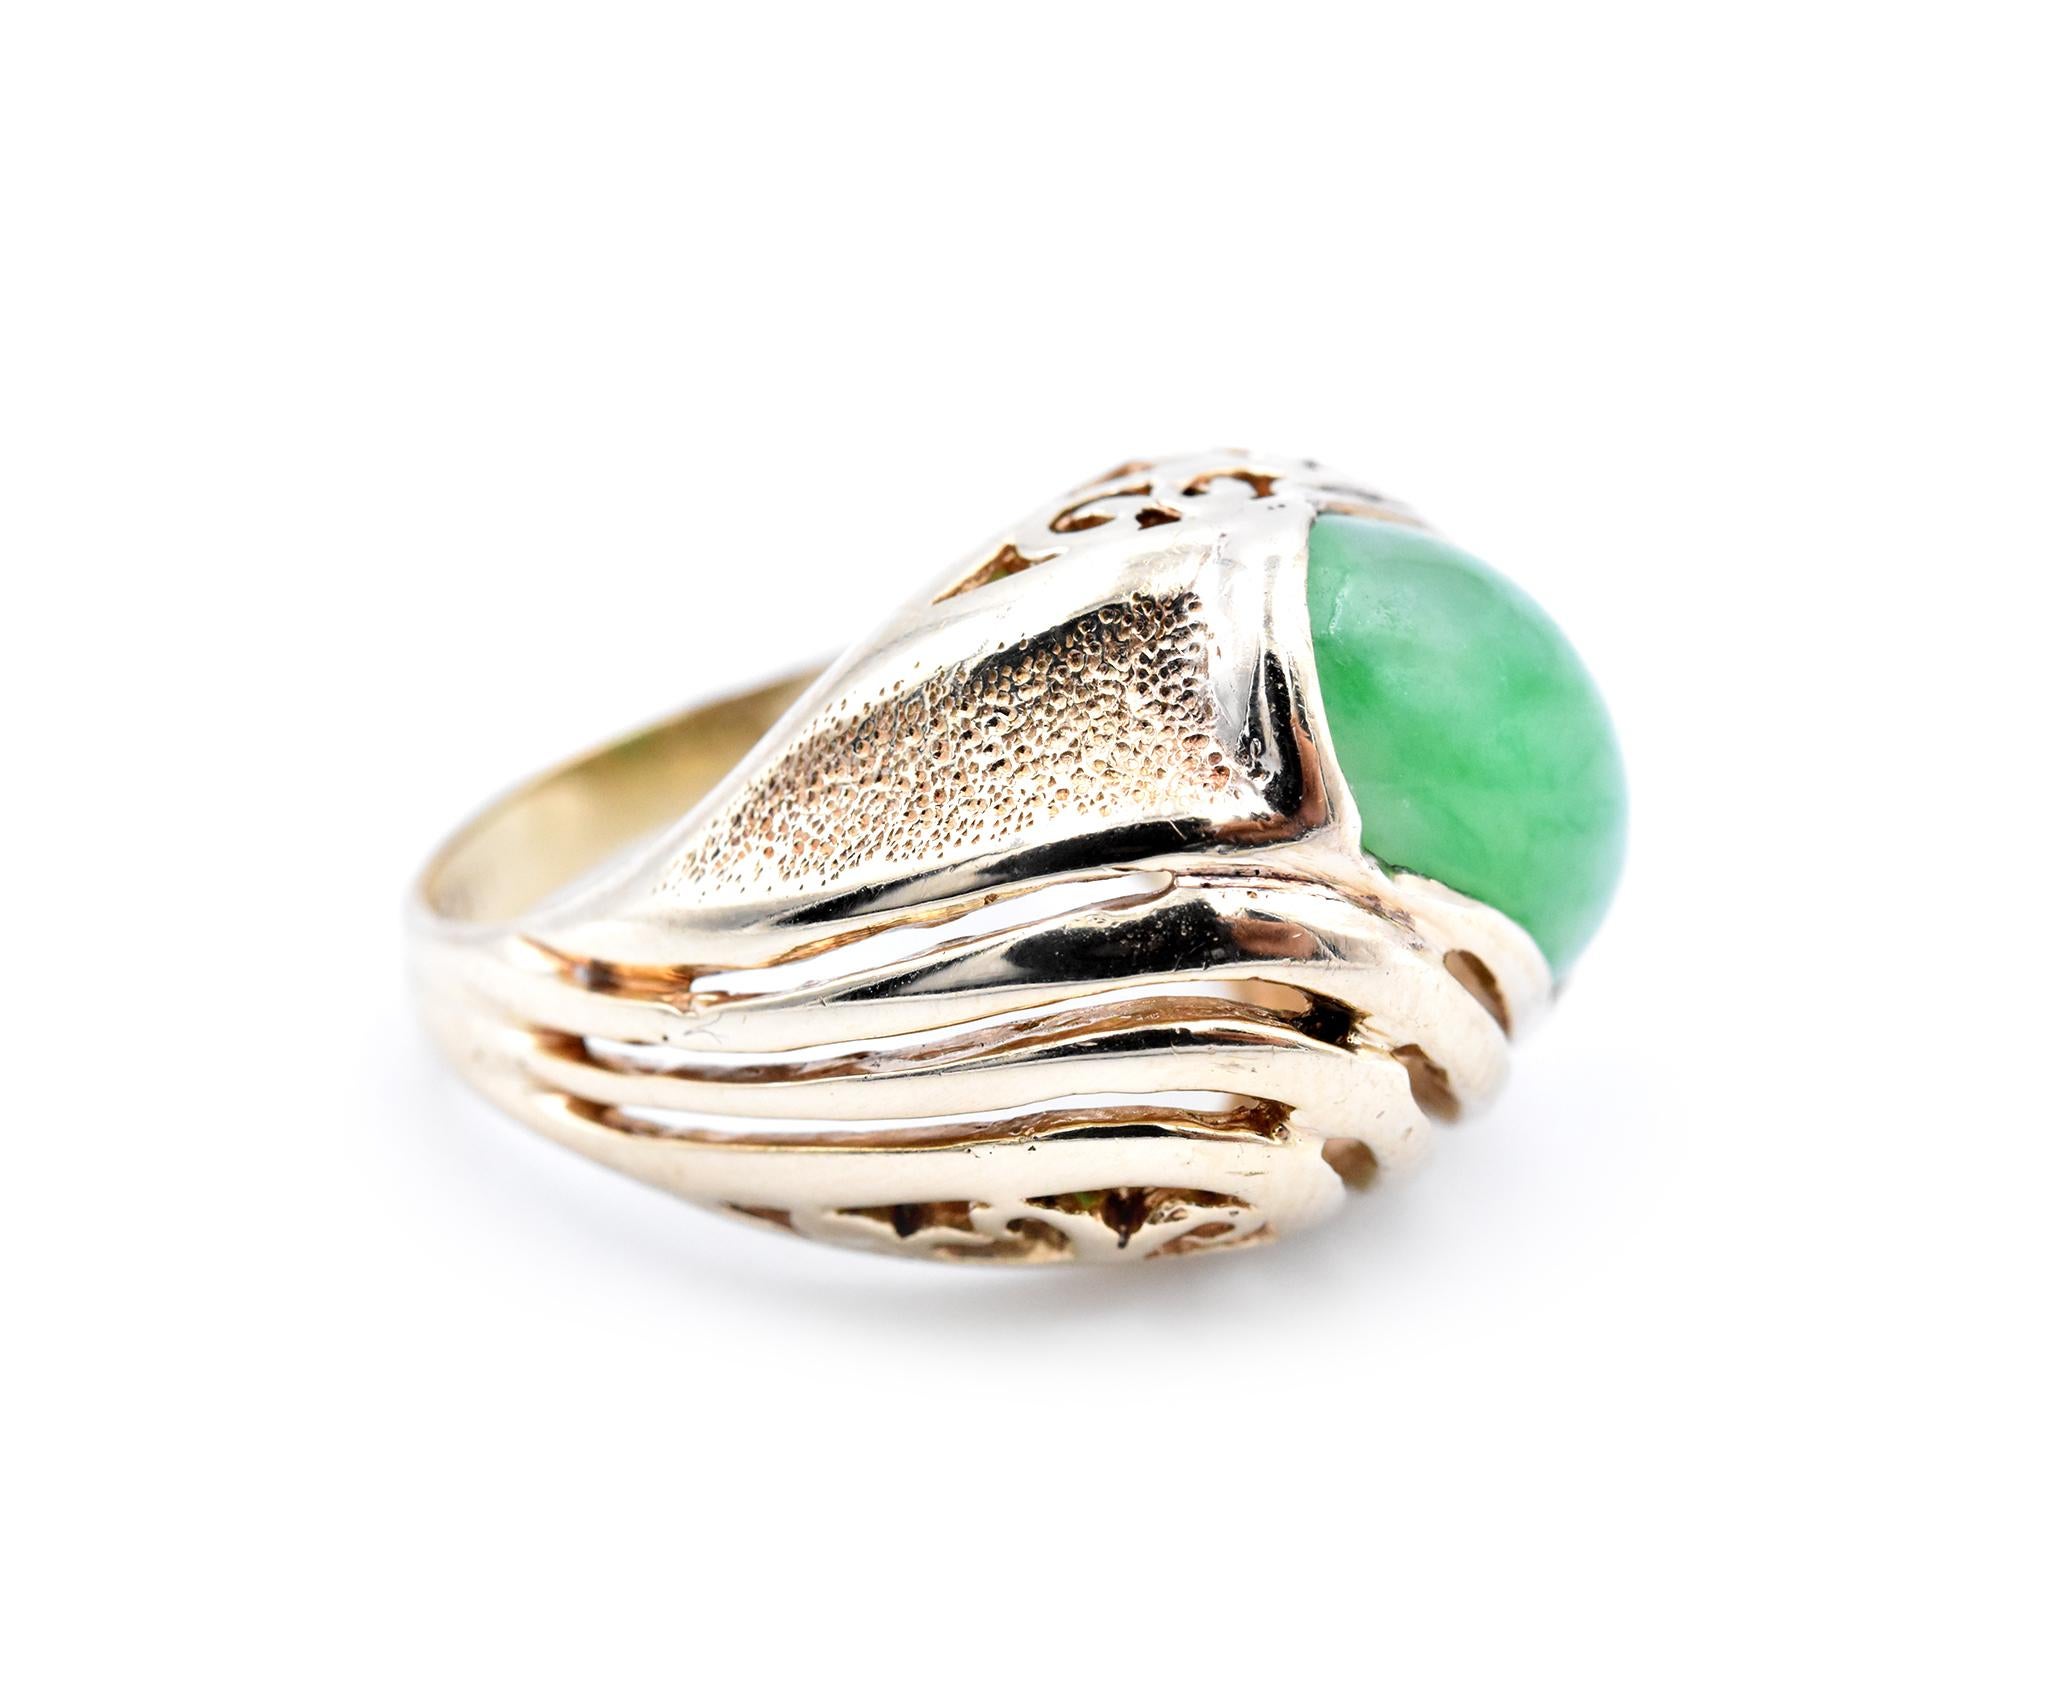 Material: 14k yellow gold
Jade: Oval Cut=9.38ct
Ring Size: 6 (please allow two additional shipping days for sizing requests)
Dimensions: ring top measures 16.47mm wide
Weight: 9.78 grams